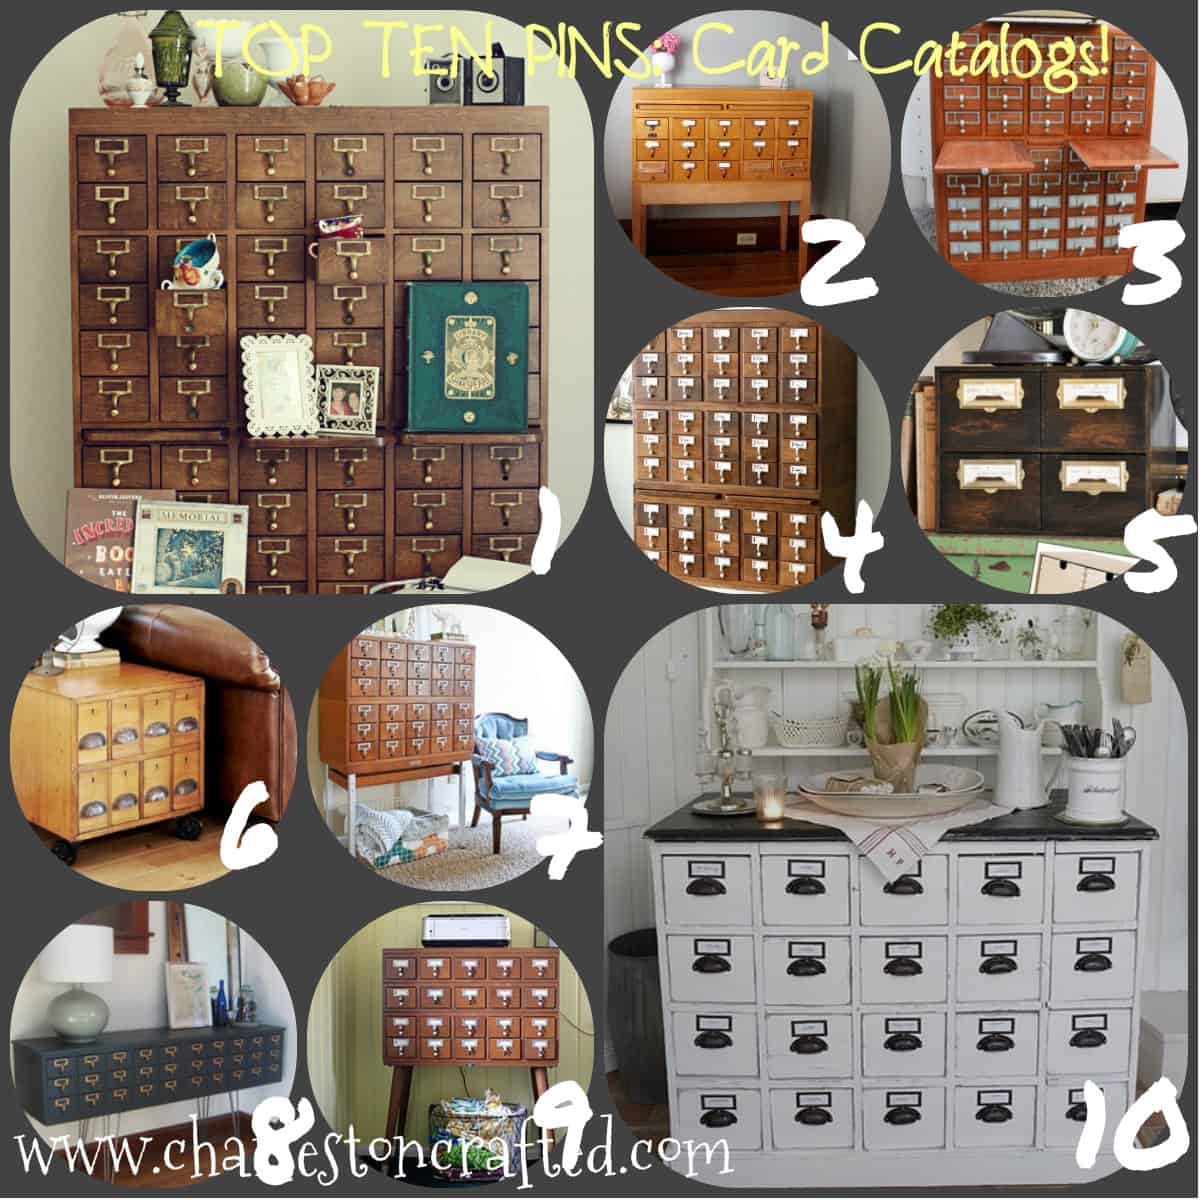 card catalog collage